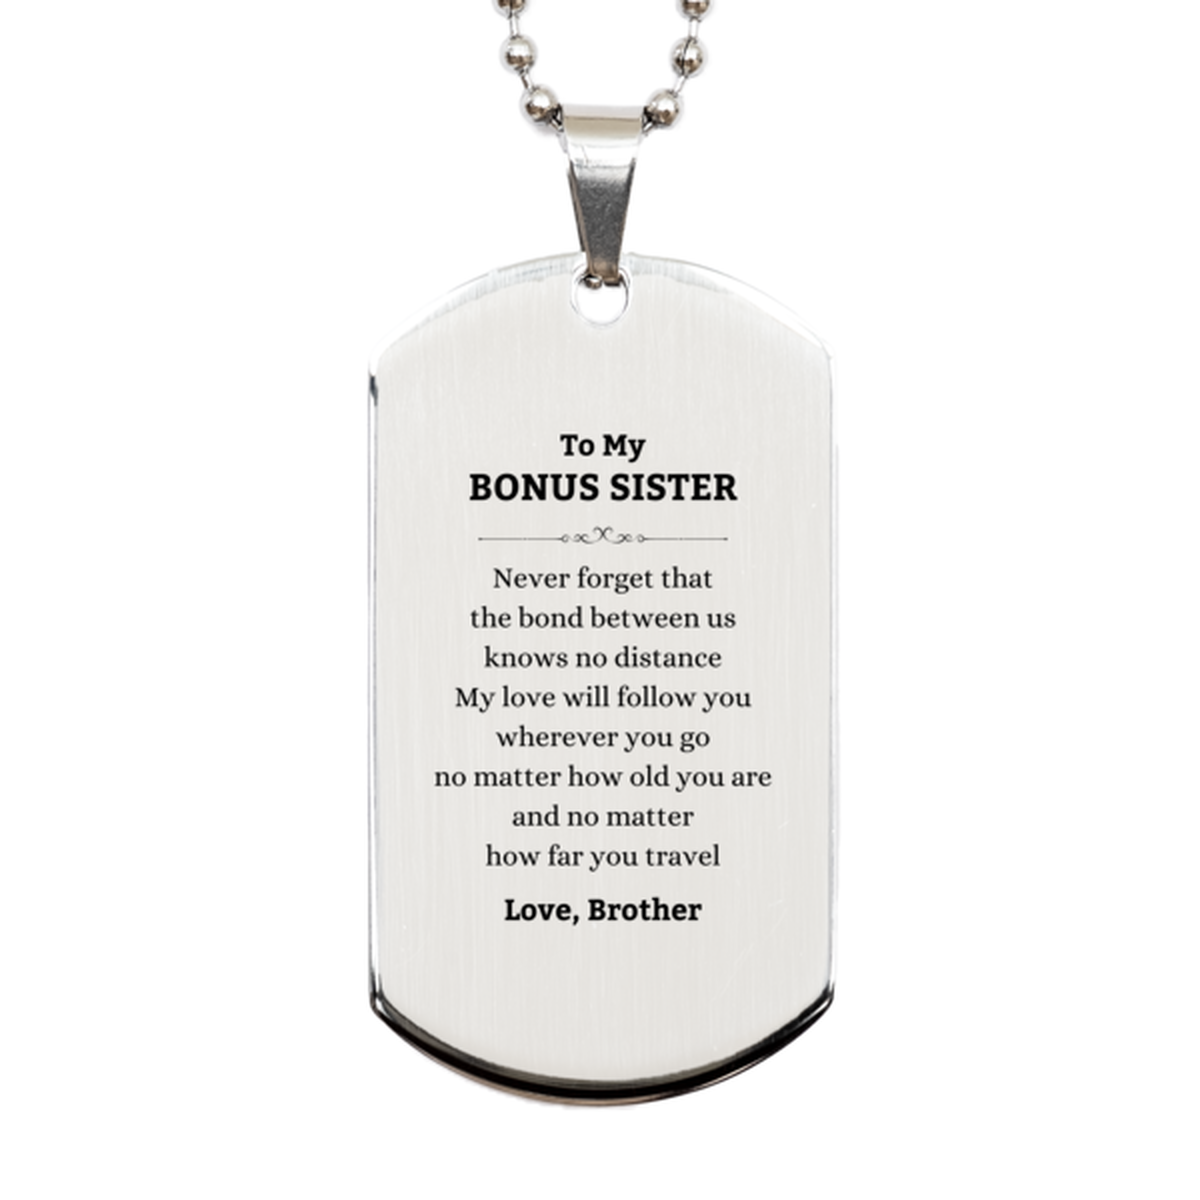 Bonus Sister Birthday Gifts from Brother, Adjustable Silver Dog Tag for Bonus Sister Christmas Graduation Unique Gifts Bonus Sister Never forget that the bond between us knows no distance. Love, Brother